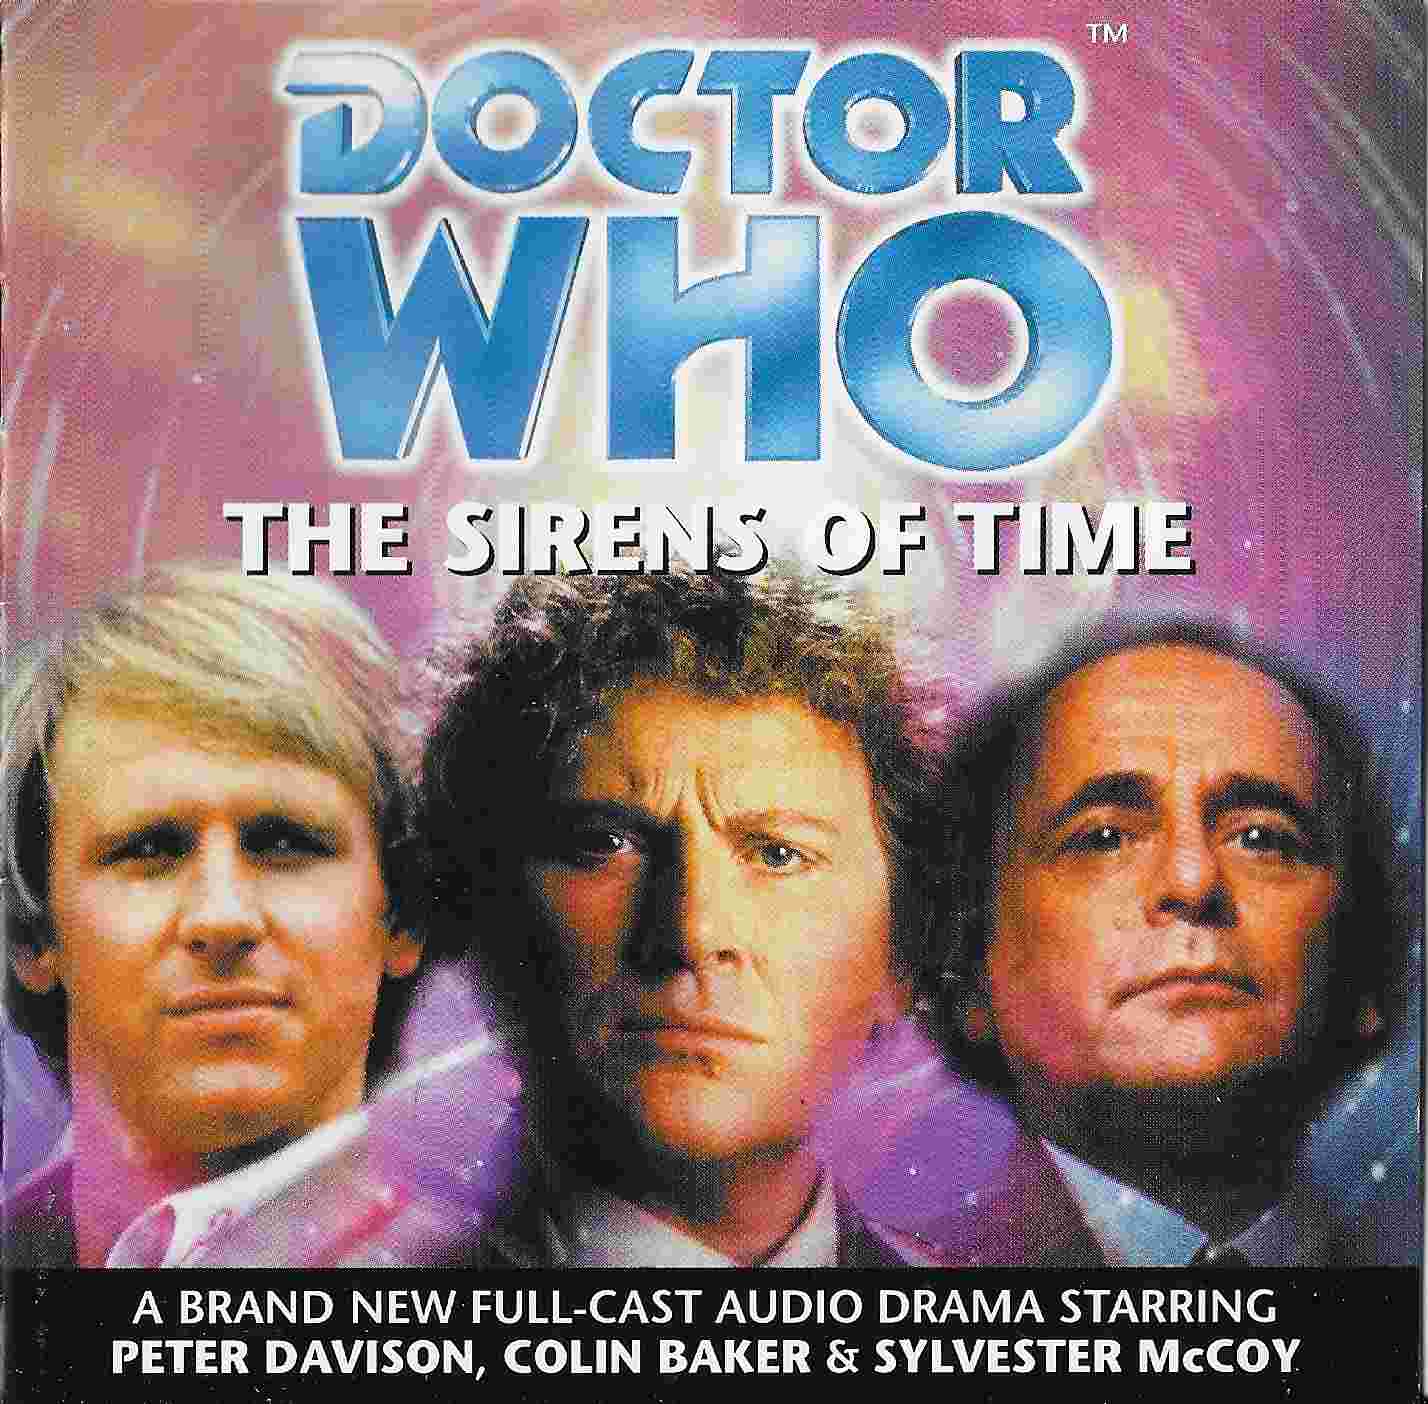 Picture of Doctor who - Sirens of time  by artist Nicholas Briggs from the BBC cds - Records and Tapes library